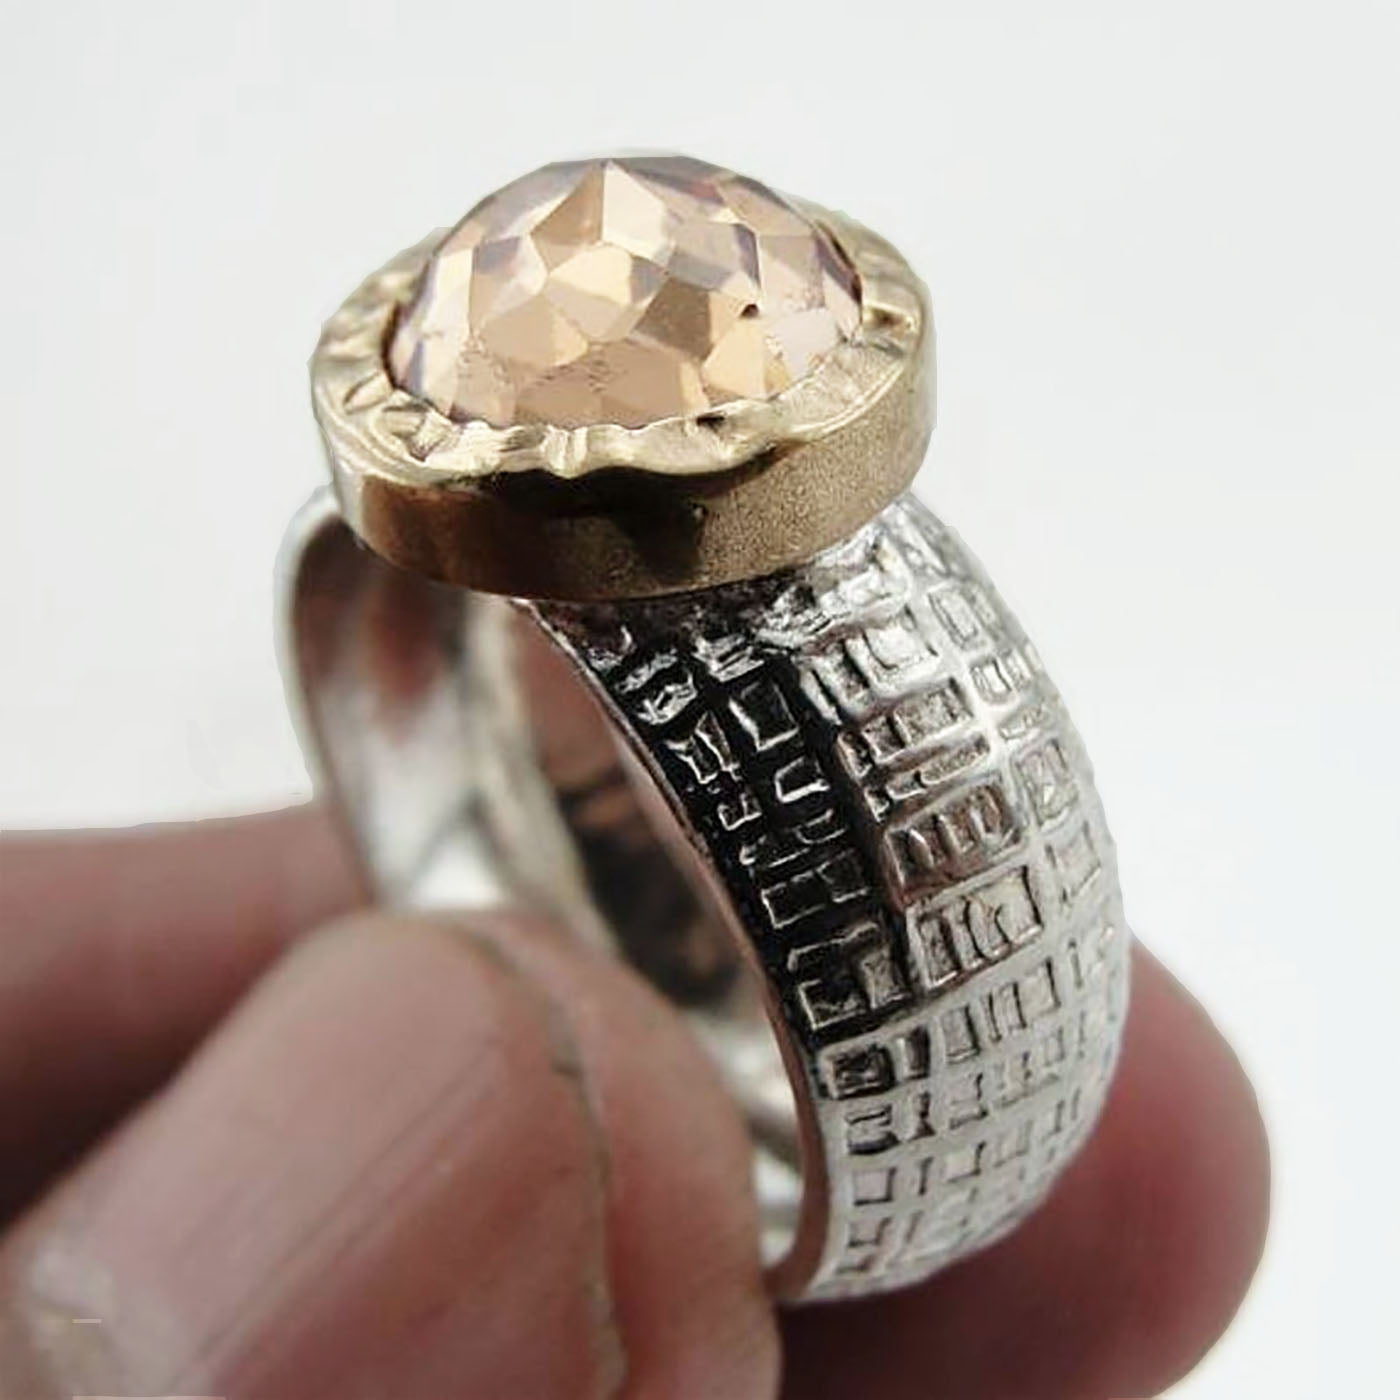 Champaign Ring 9K Gold Sterling Silver 925 Round Champaign Ring for Israeli Women Israeli Wife